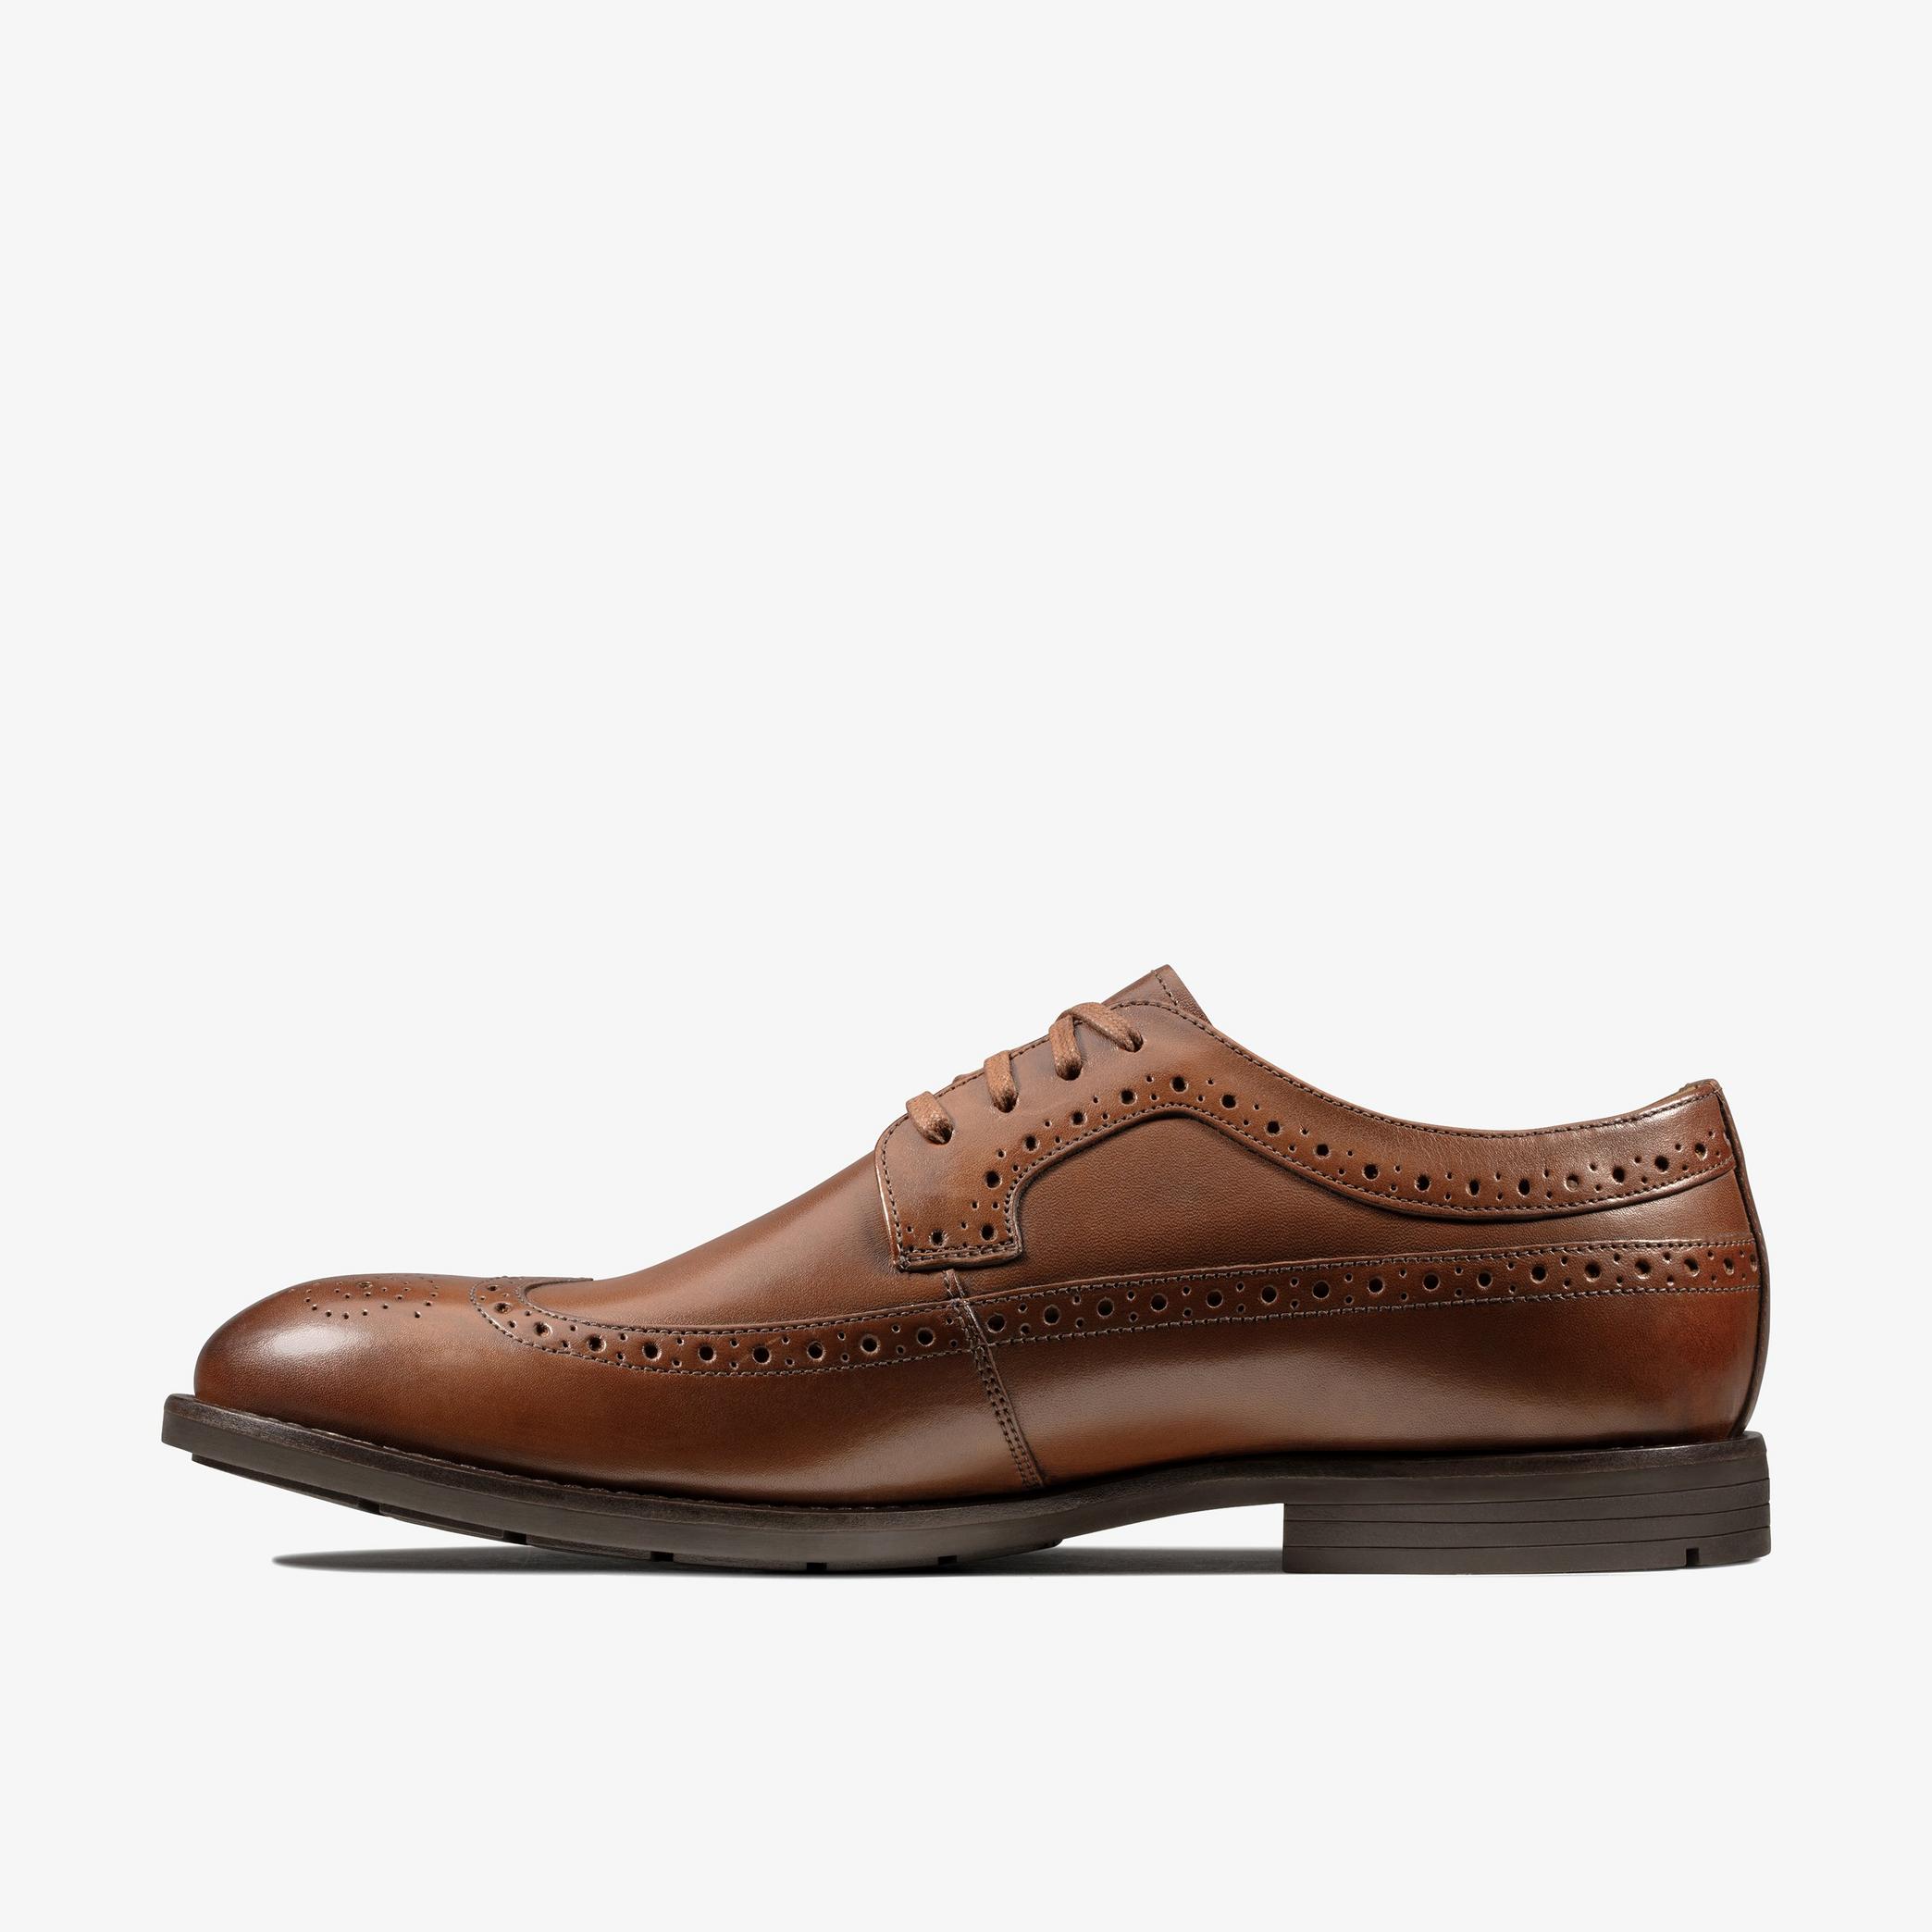 Ronnie Limit British Tan Leather Brogues, view 2 of 6